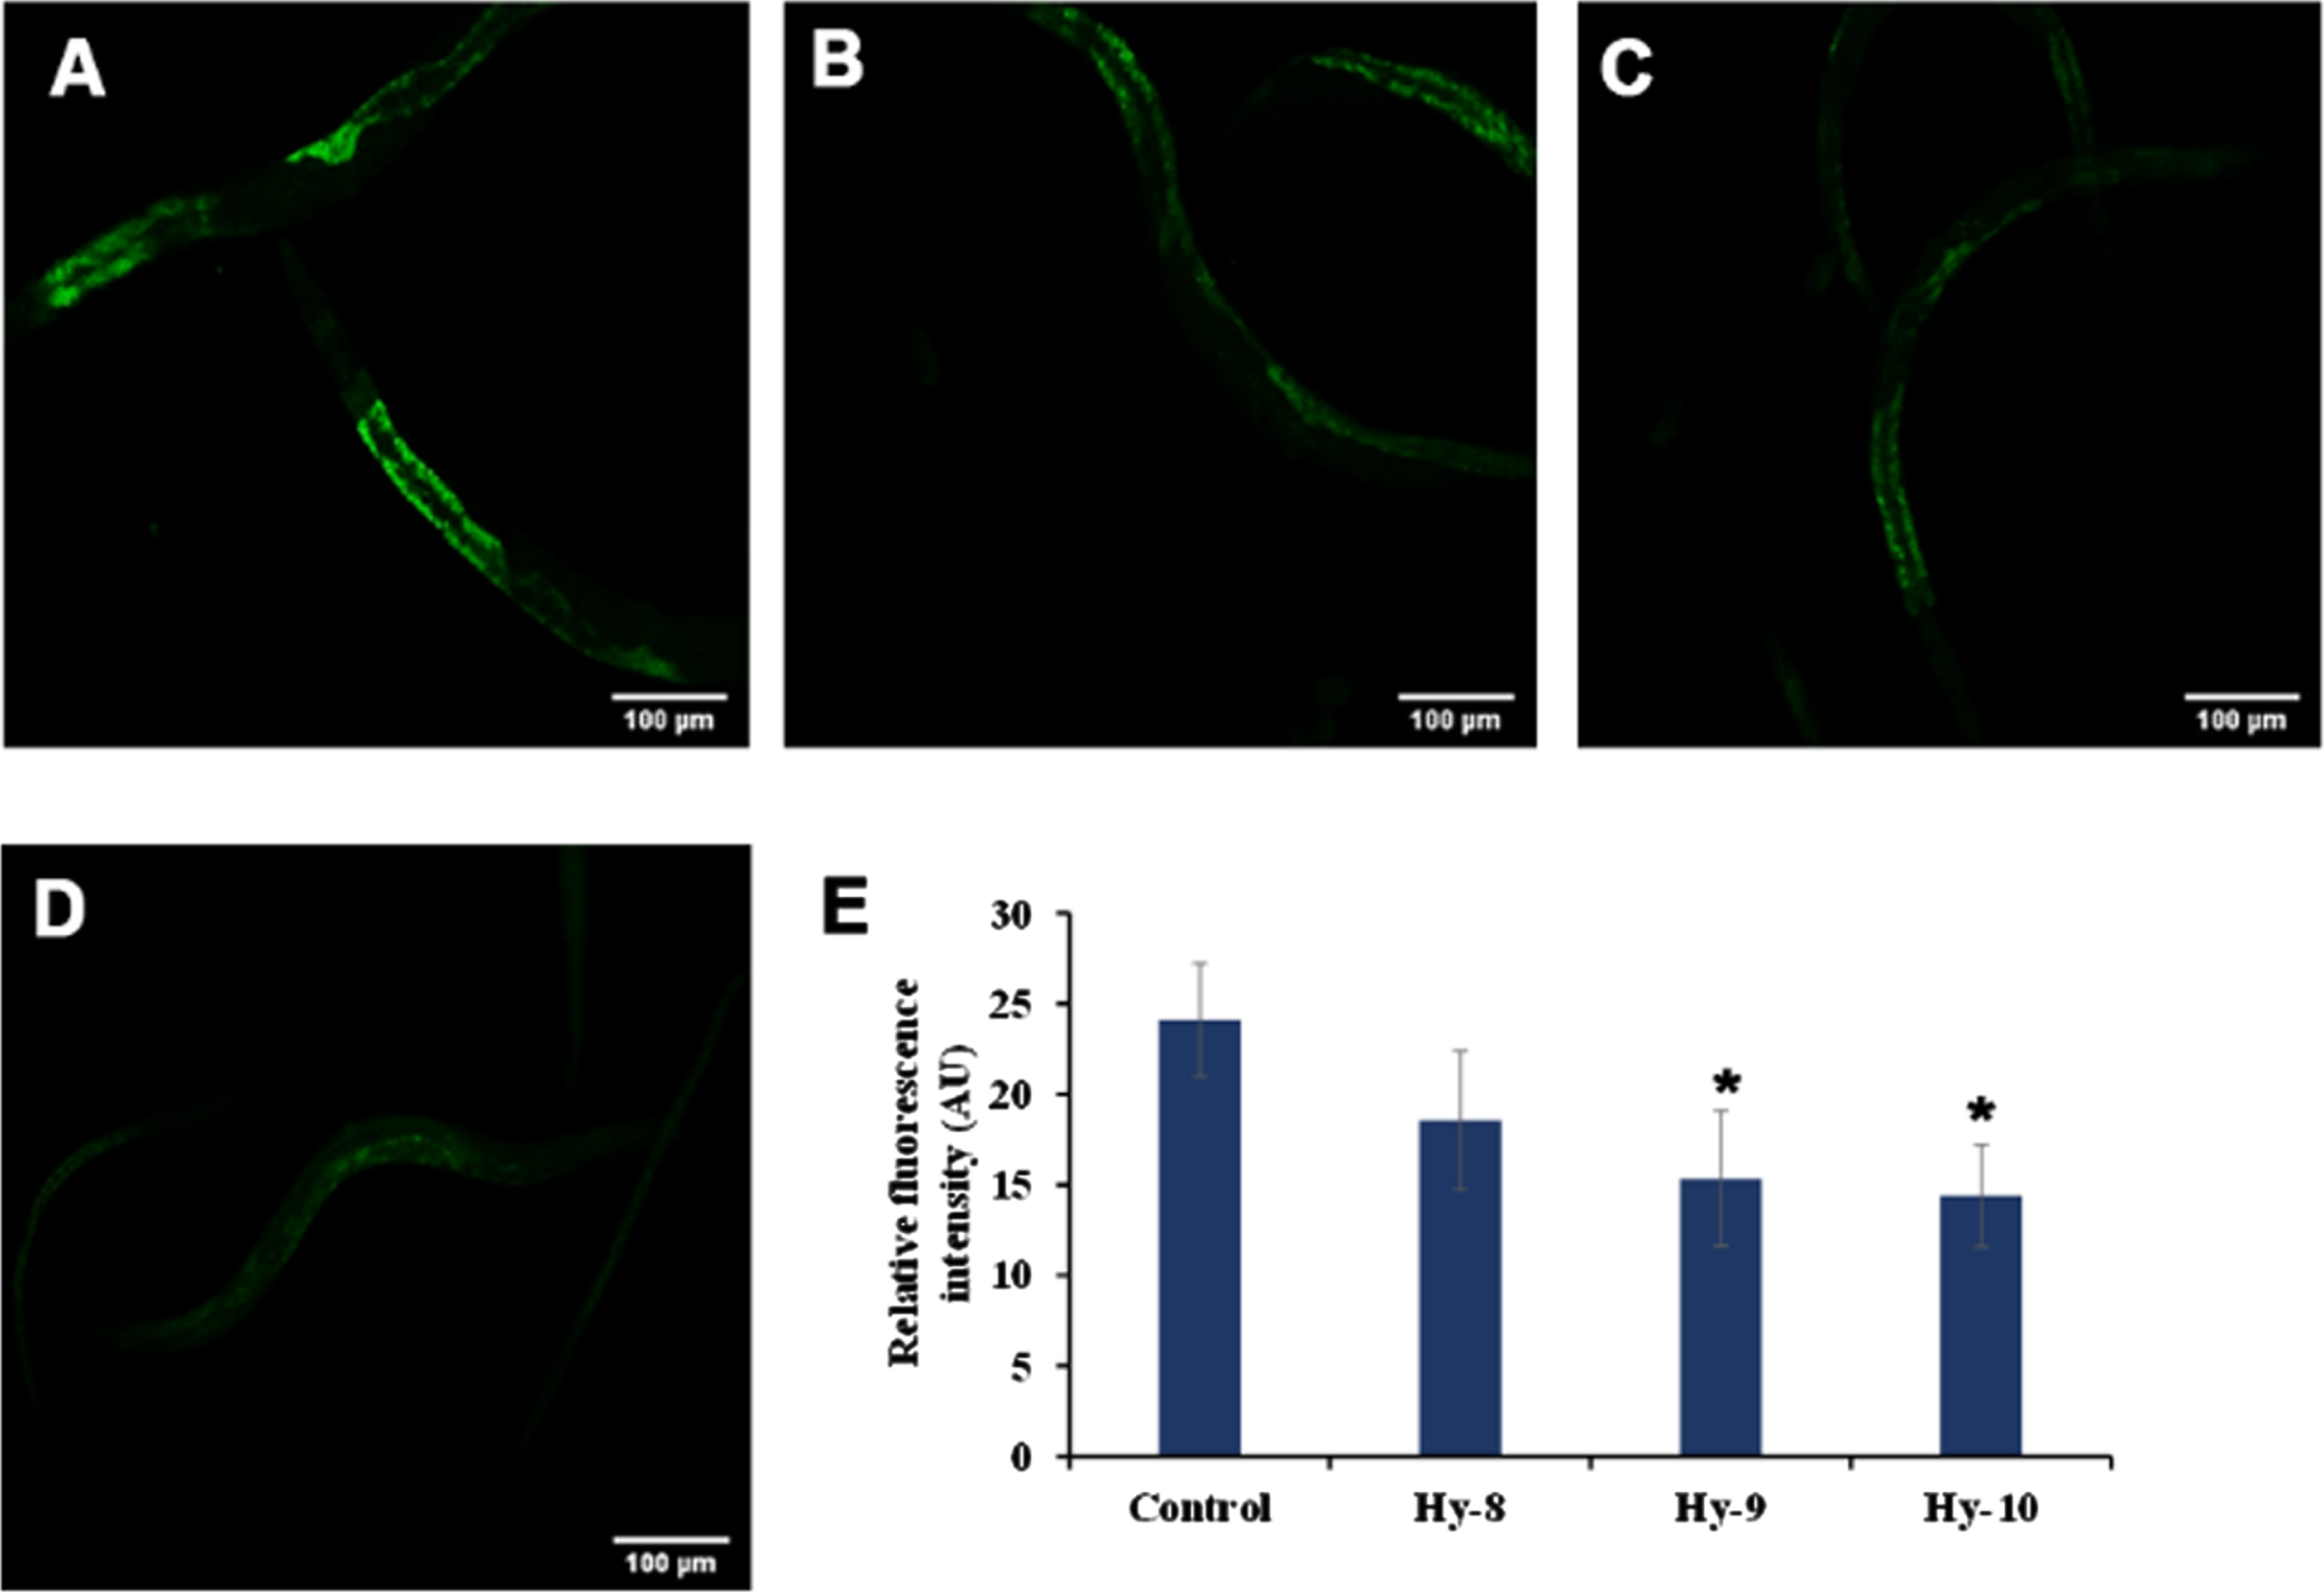 Effect of KP and DMF on the aging marker lipofuscin in N2 nematodes. (A) Control (B) H. undatus extract 8μg/ml (C) H. undatus extract 9μg/ml (D) H. undatus extract 10μg/ml.